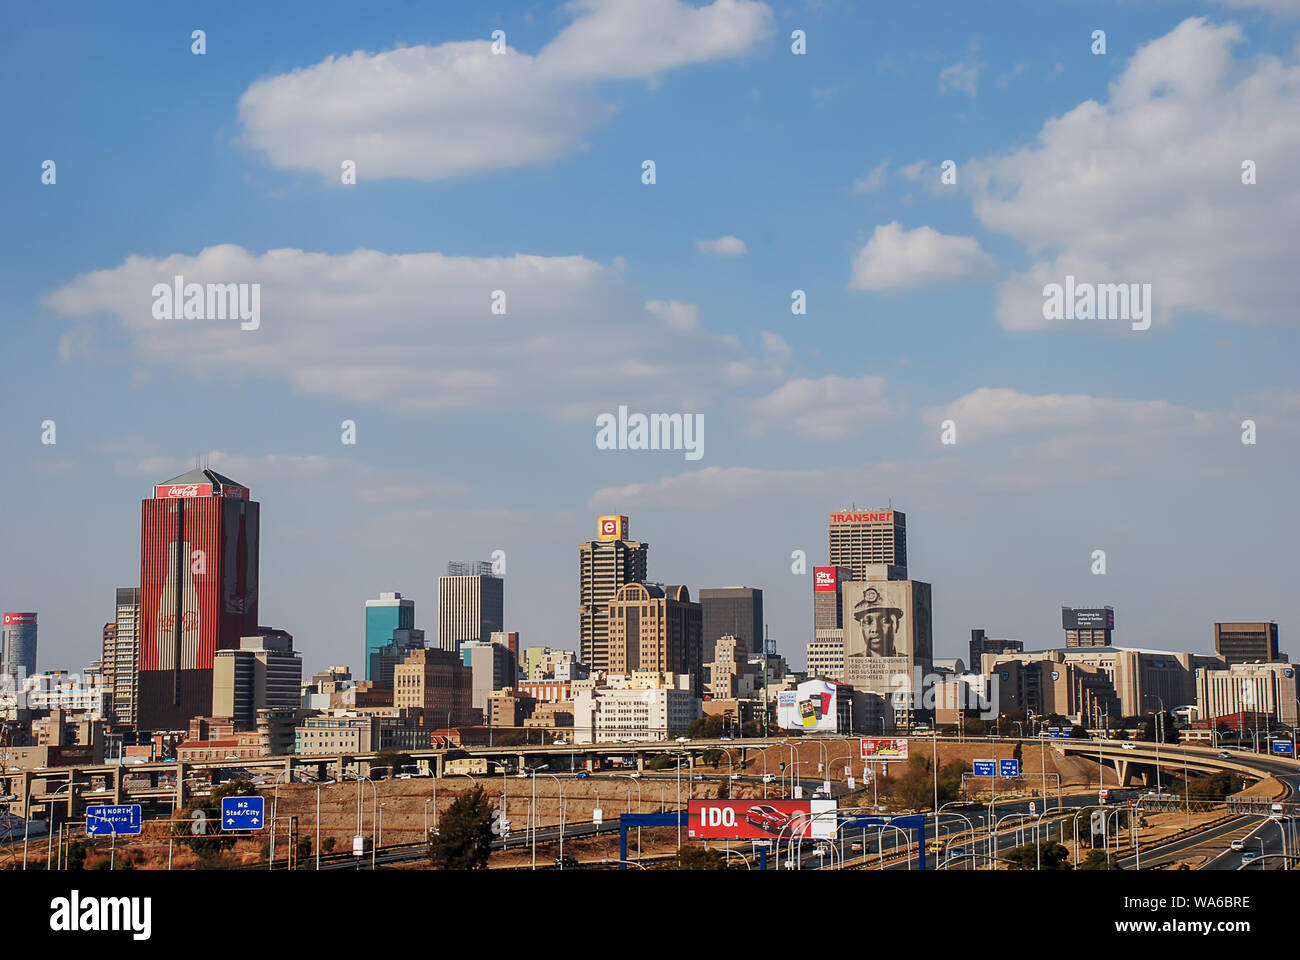 The skyline of downtown Joburg, South Africa Stock Photo